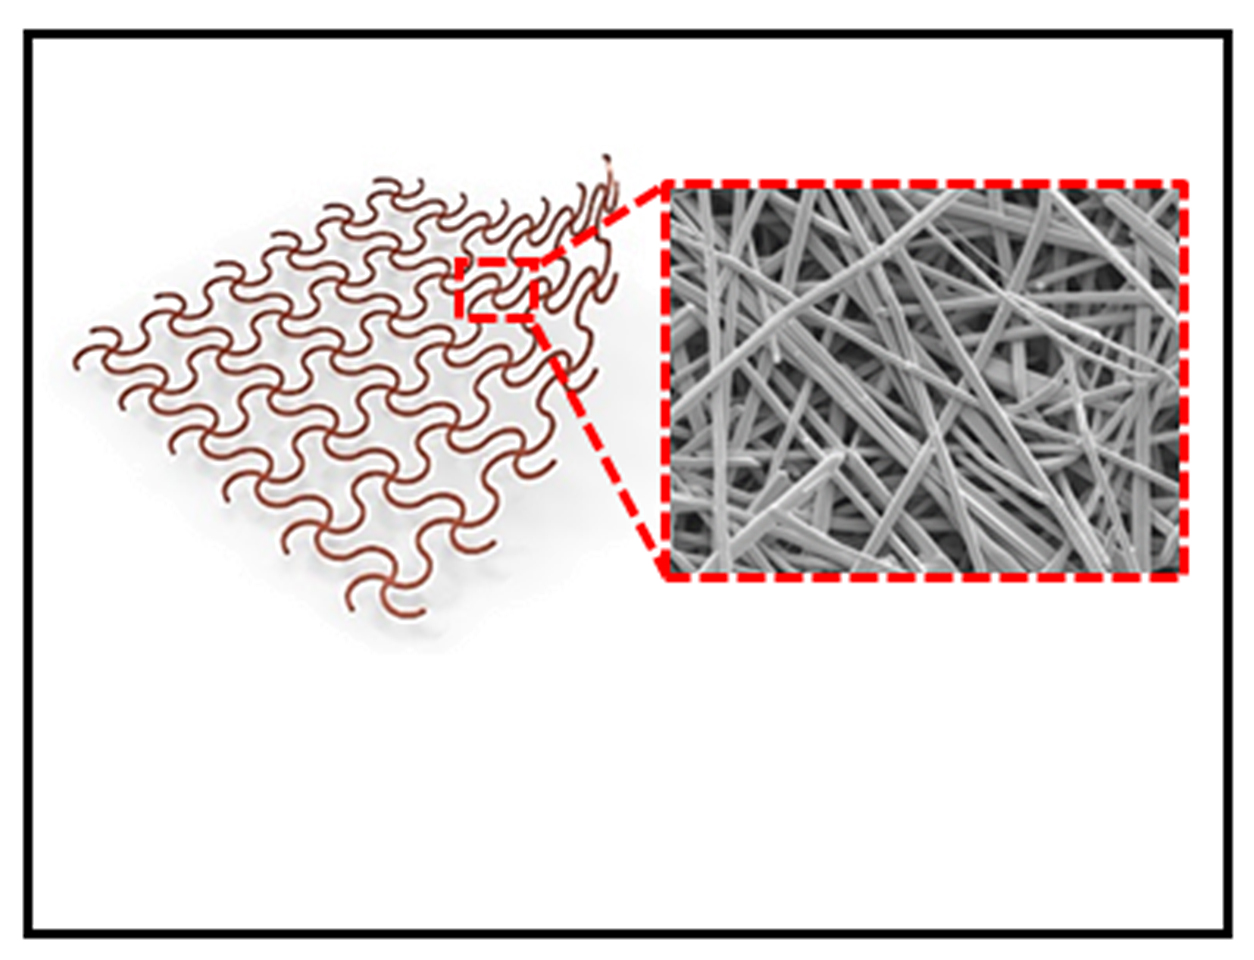 Nanowires made from silver are super stretchy